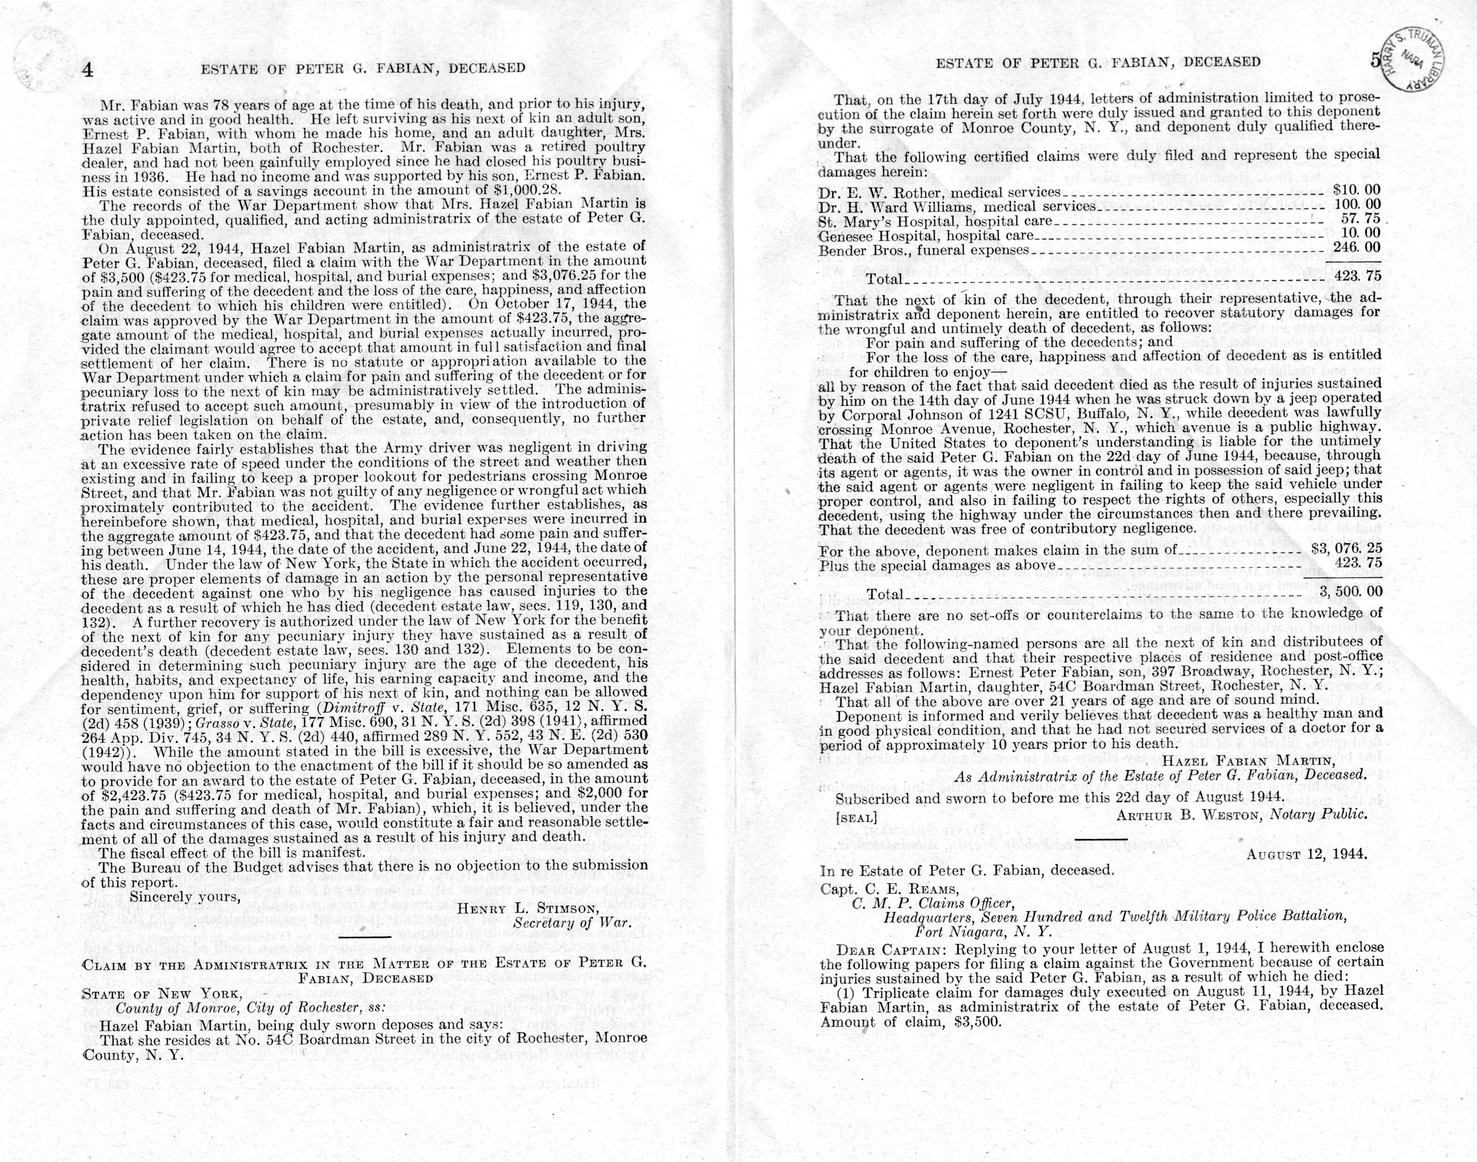 Memorandum from Frederick J. Bailey to M. C. Latta, H. R. 1890, For the Relief of the Estate of Peter G. Fabian, Deceased, with Attachments